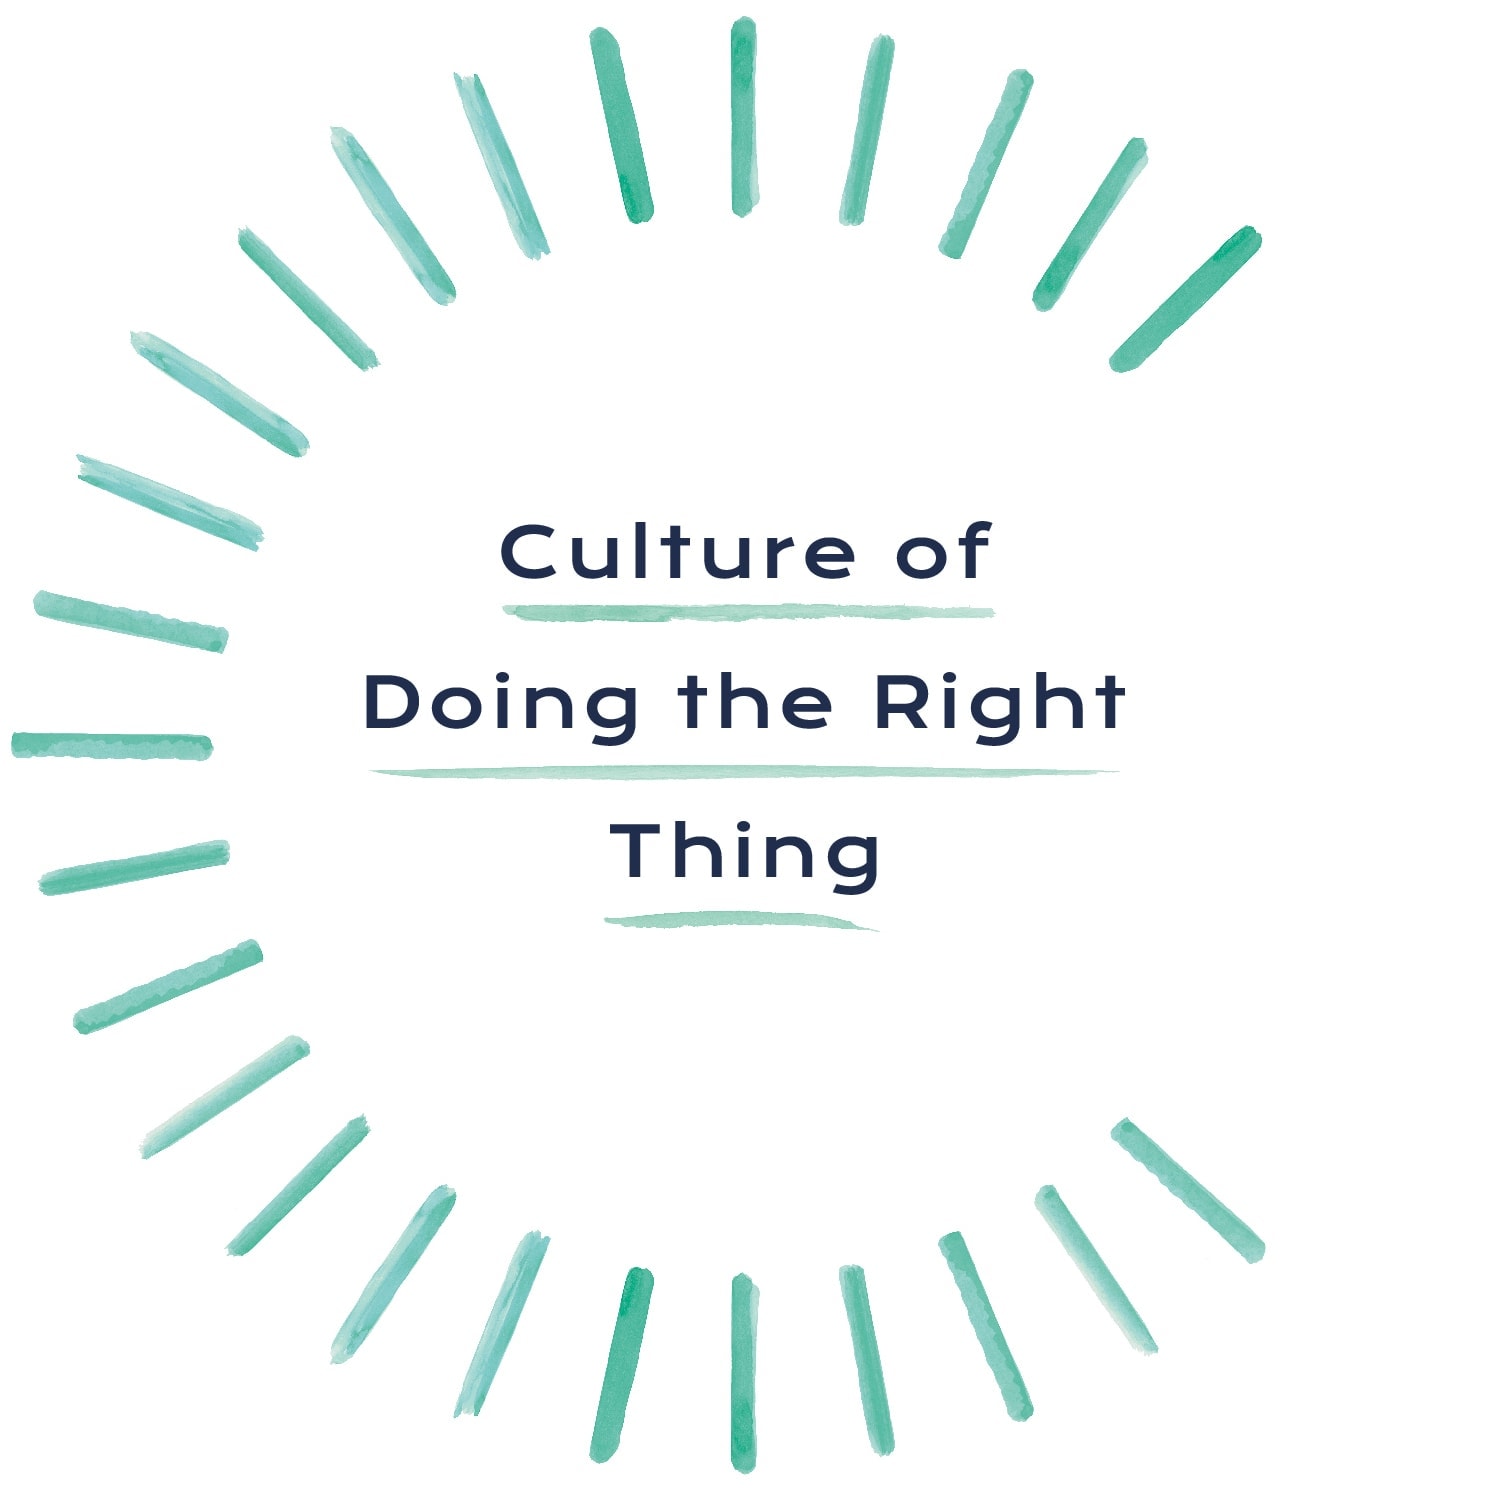 Our mission: Culture of Doing the Right Thing.